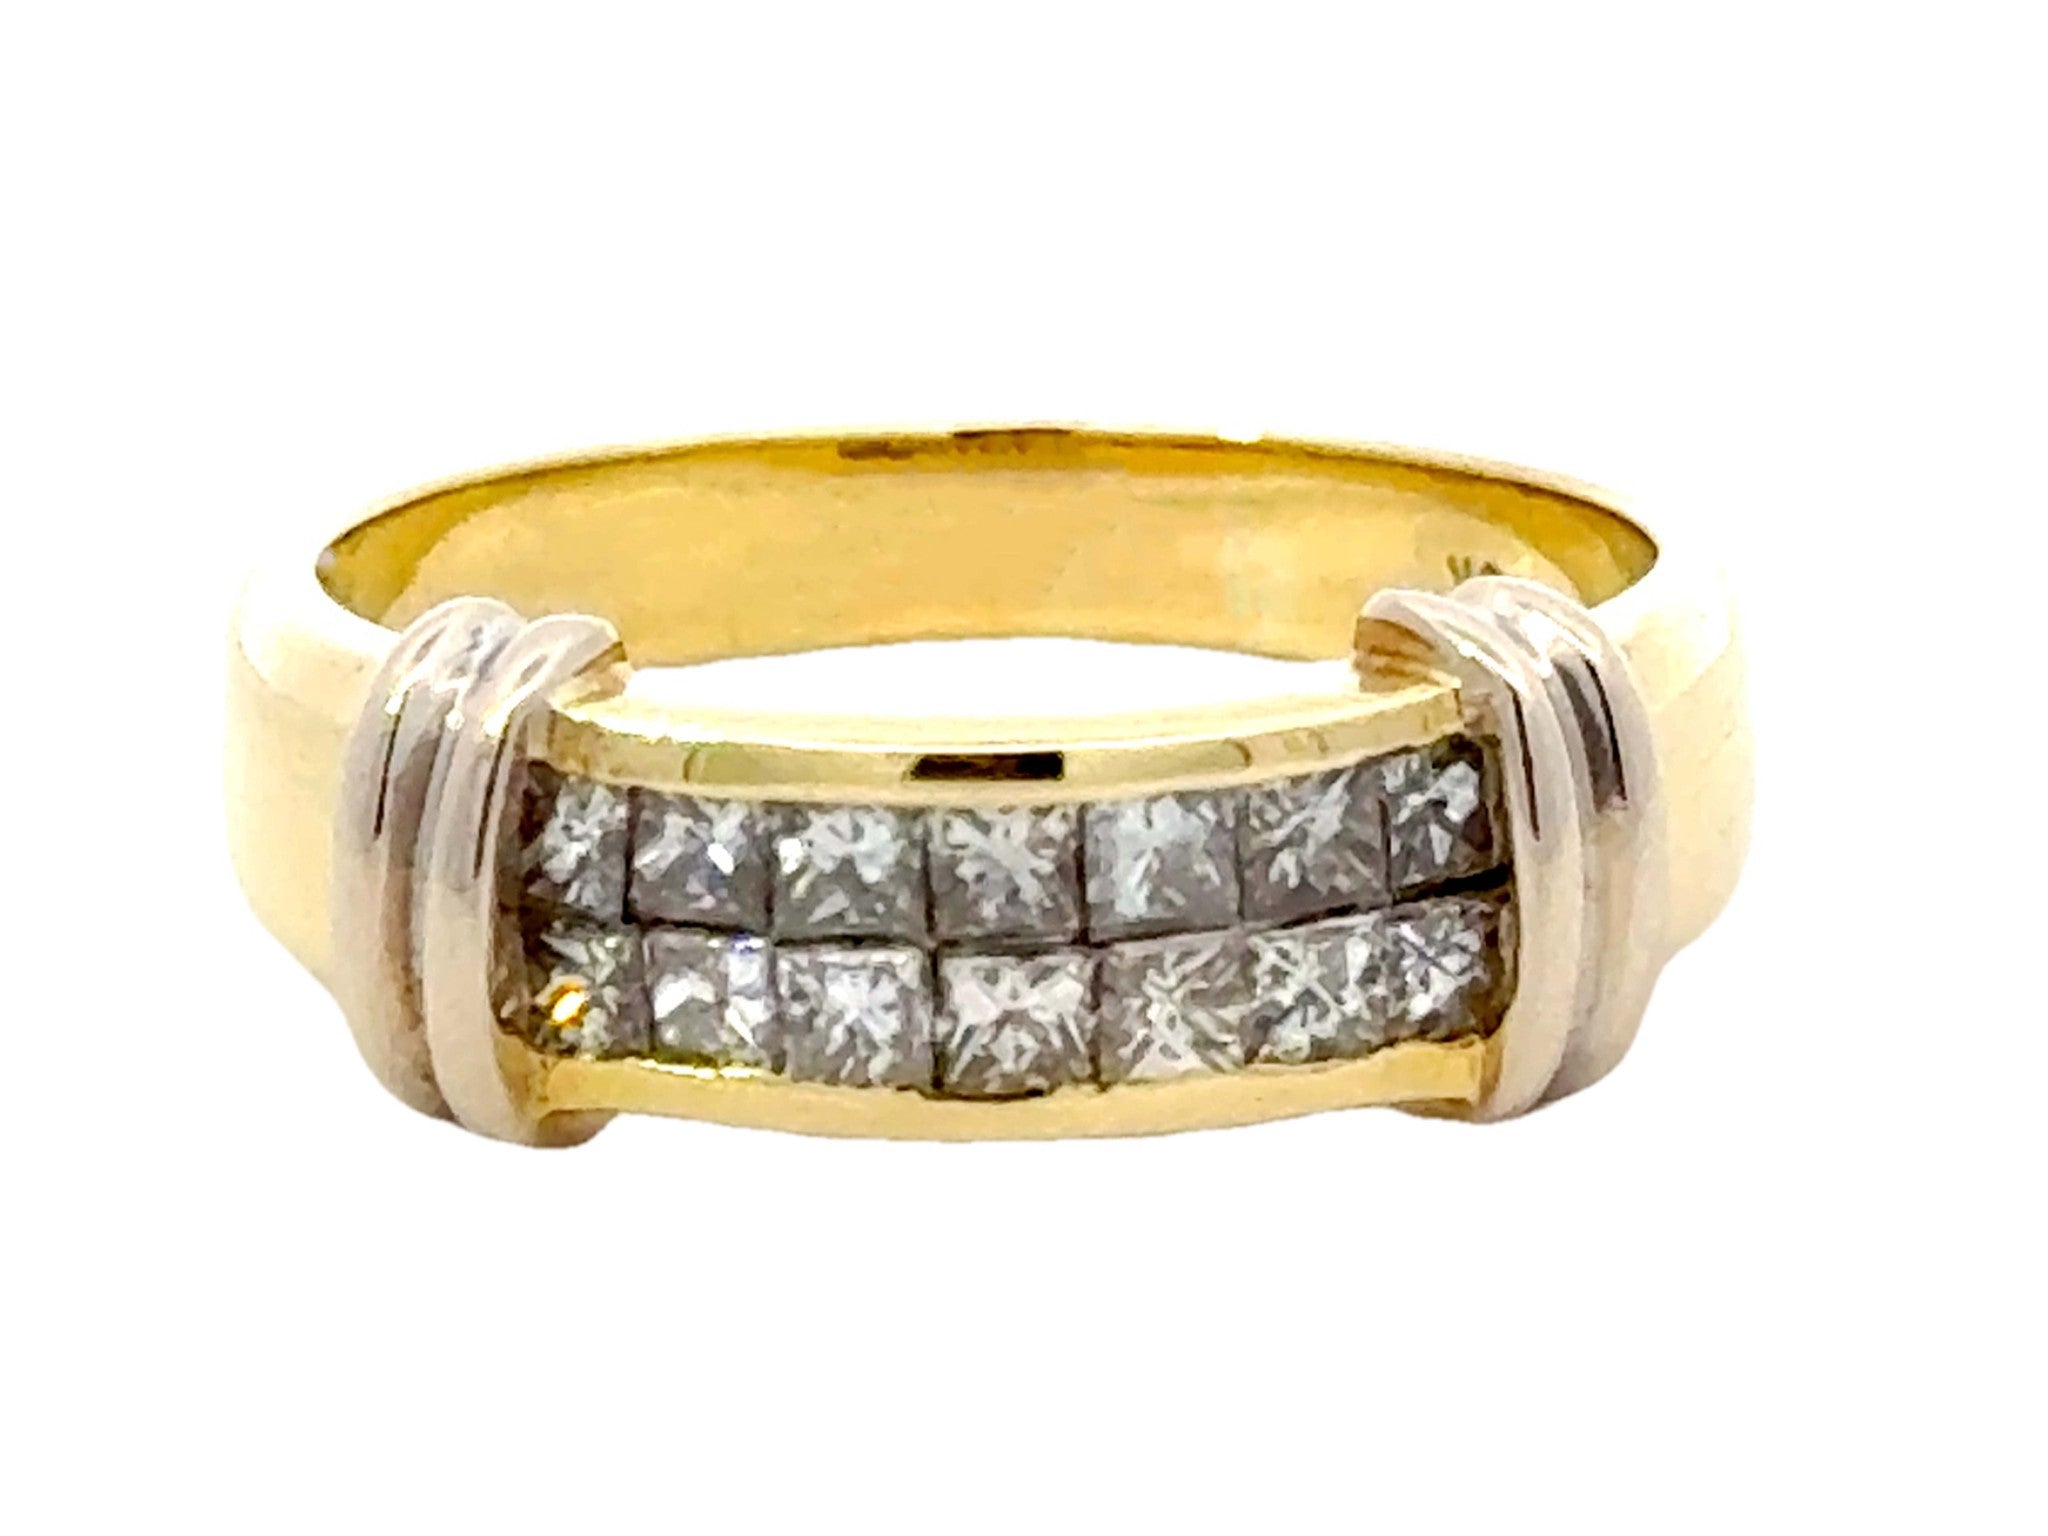 Princess Cut Channel Set Double Diamond Row Ring in 18k Gold